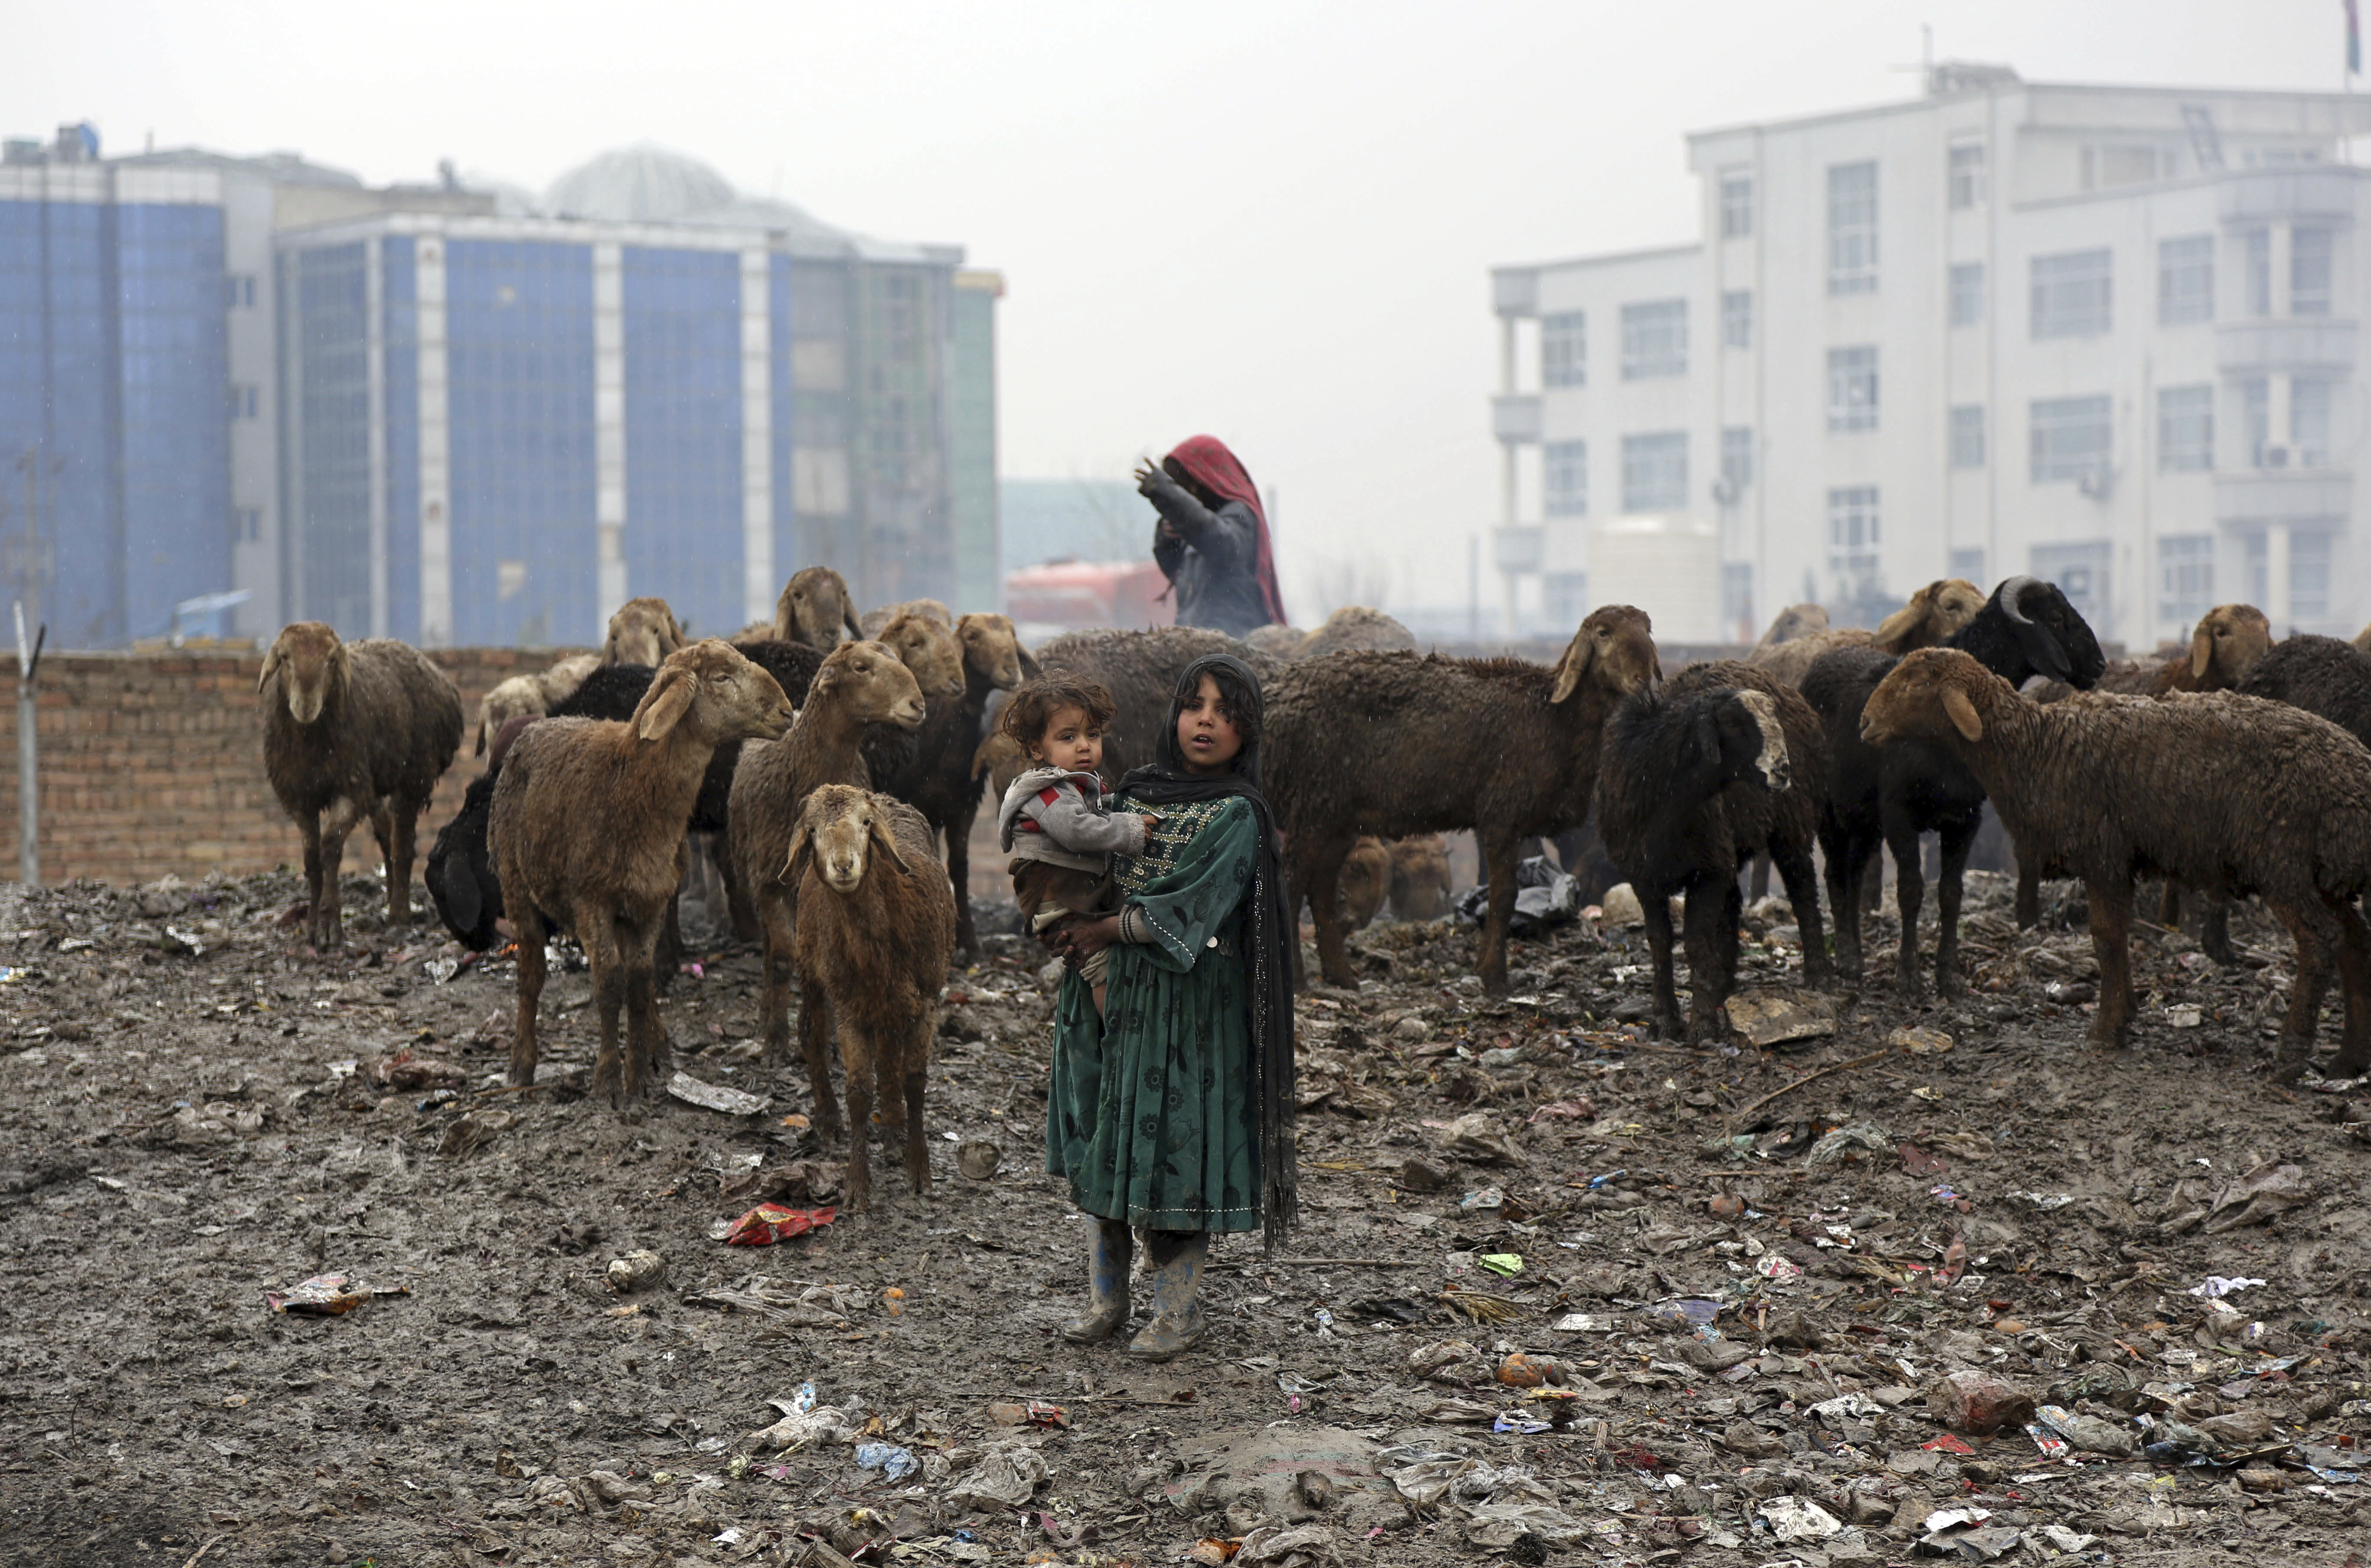 An Afghan girl holds her sister as she poses for a photograph near her sheep in Kabul, Monday, Feb. 12, 2018. (AP Photo/Rahmat Gul)